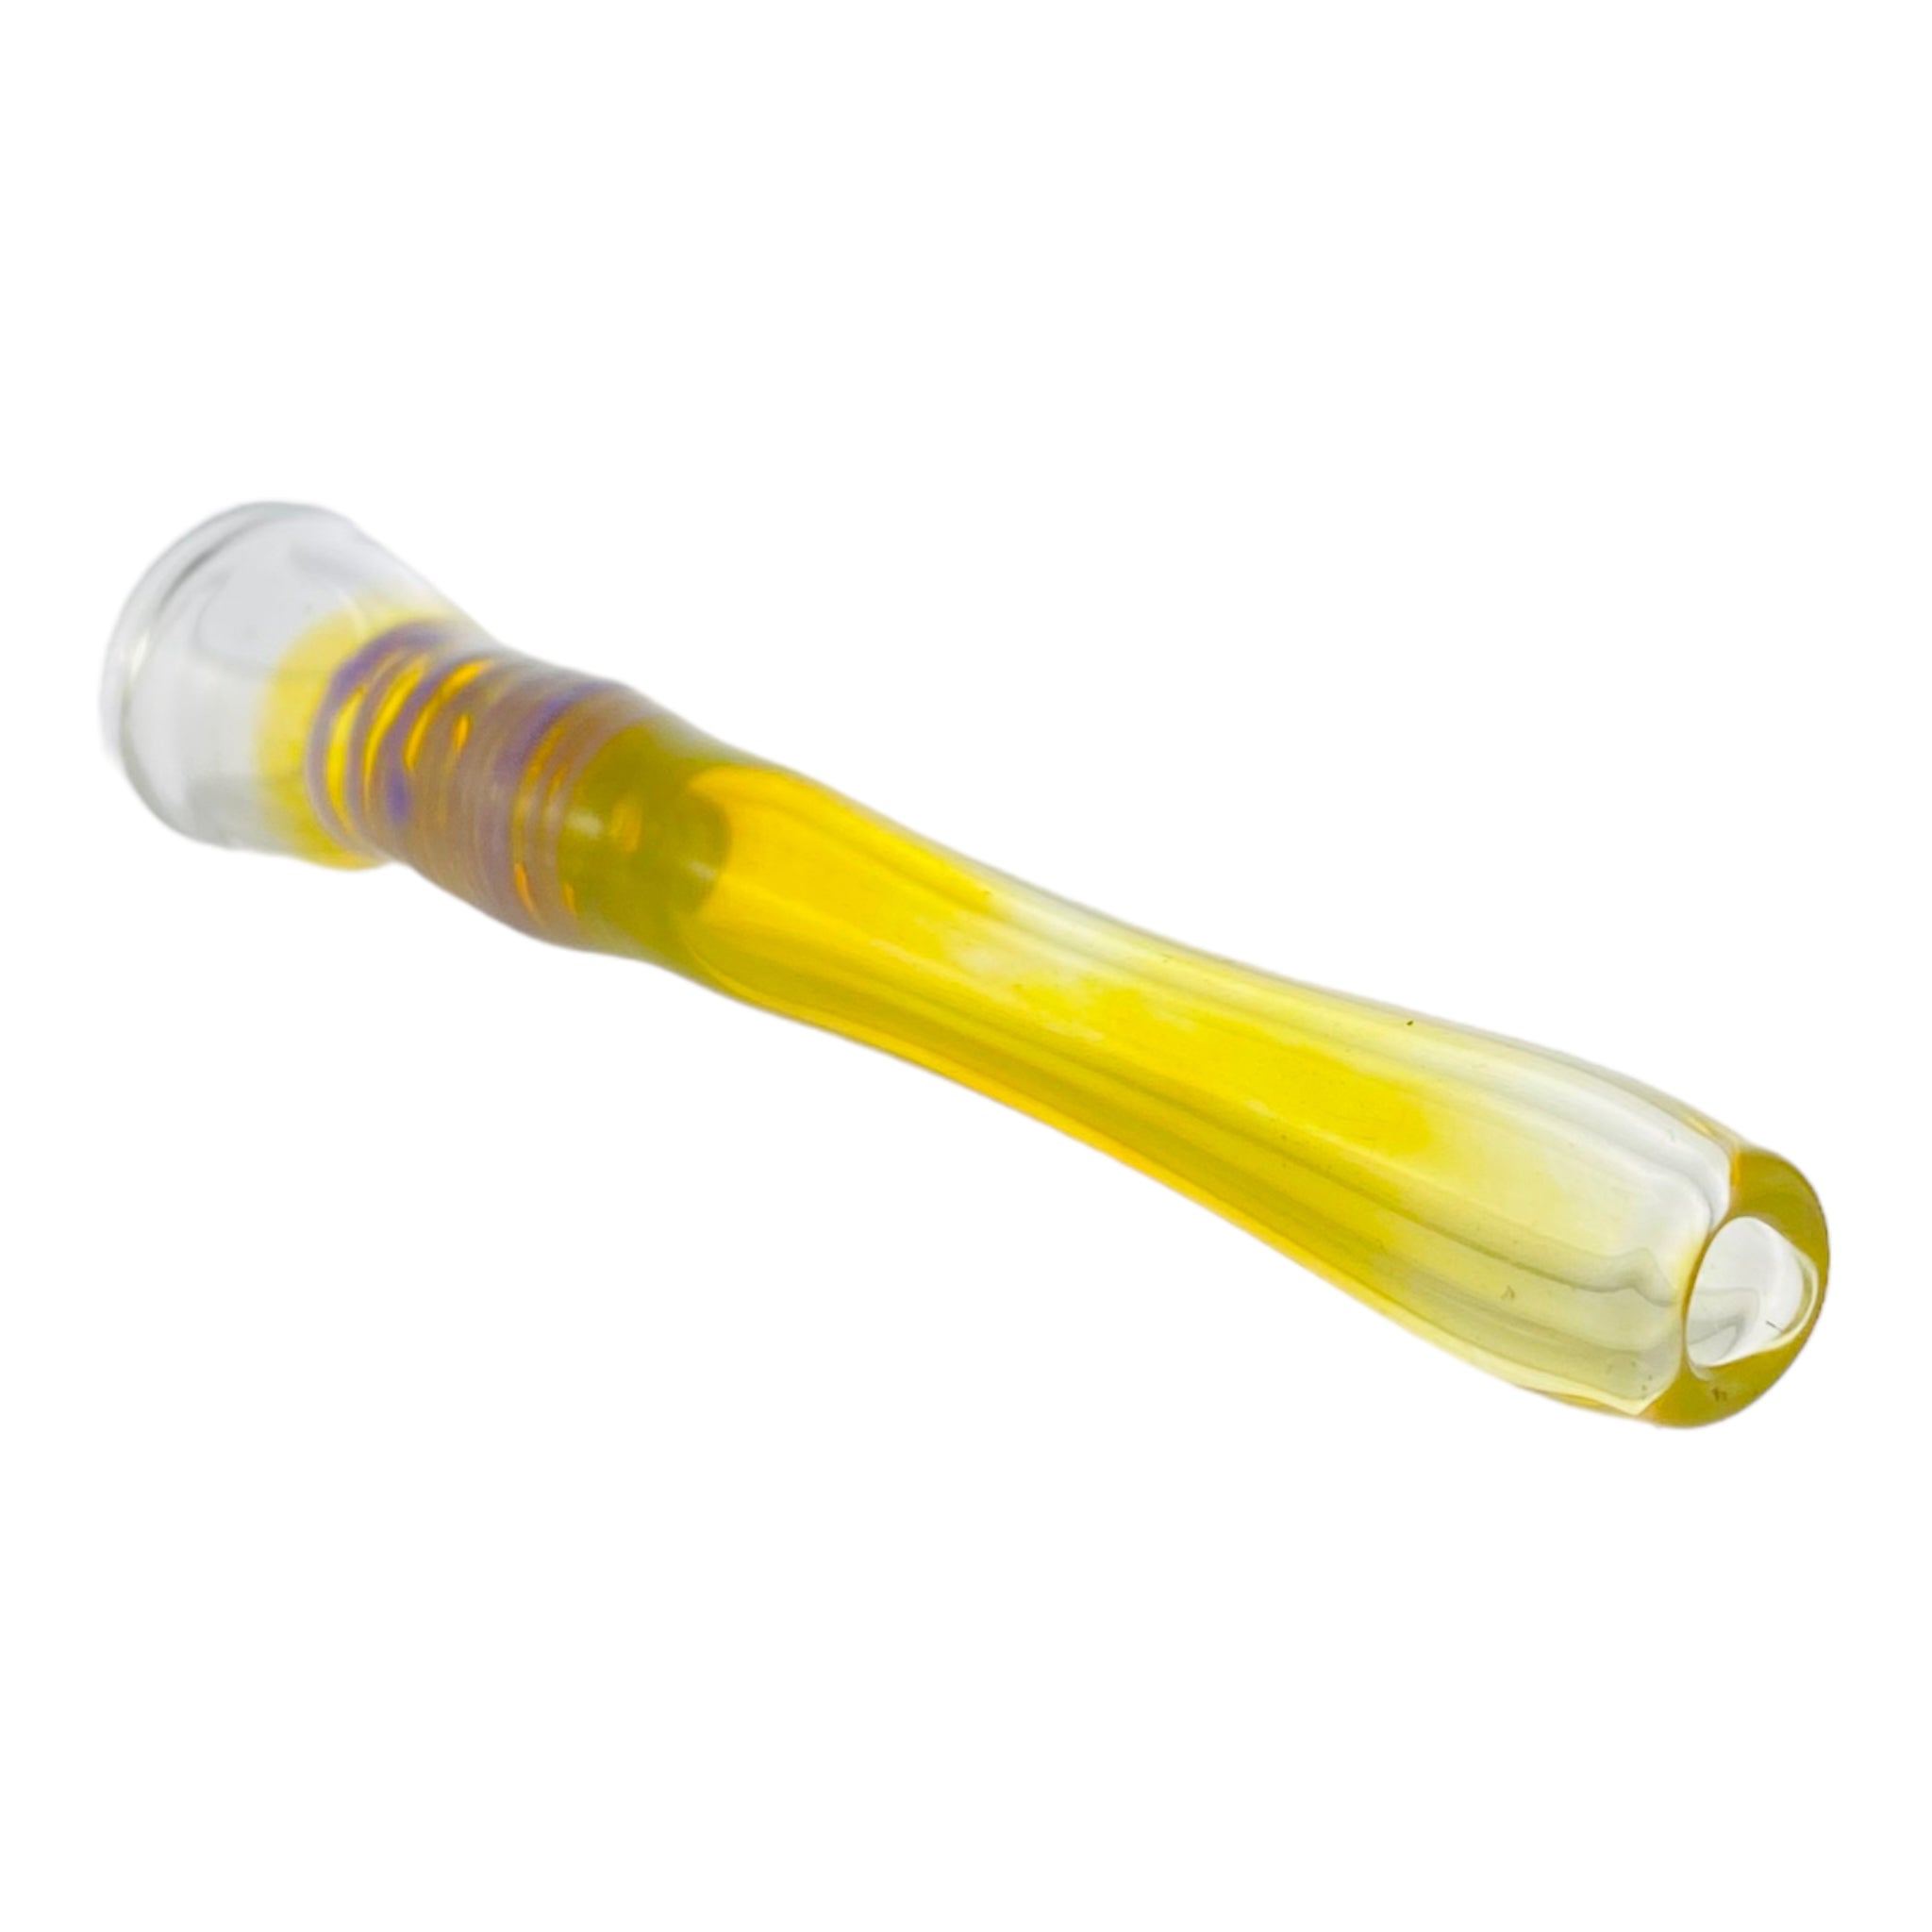 Glass Chillum Pipe - Yellow Silver Fuming With Purple Wrap